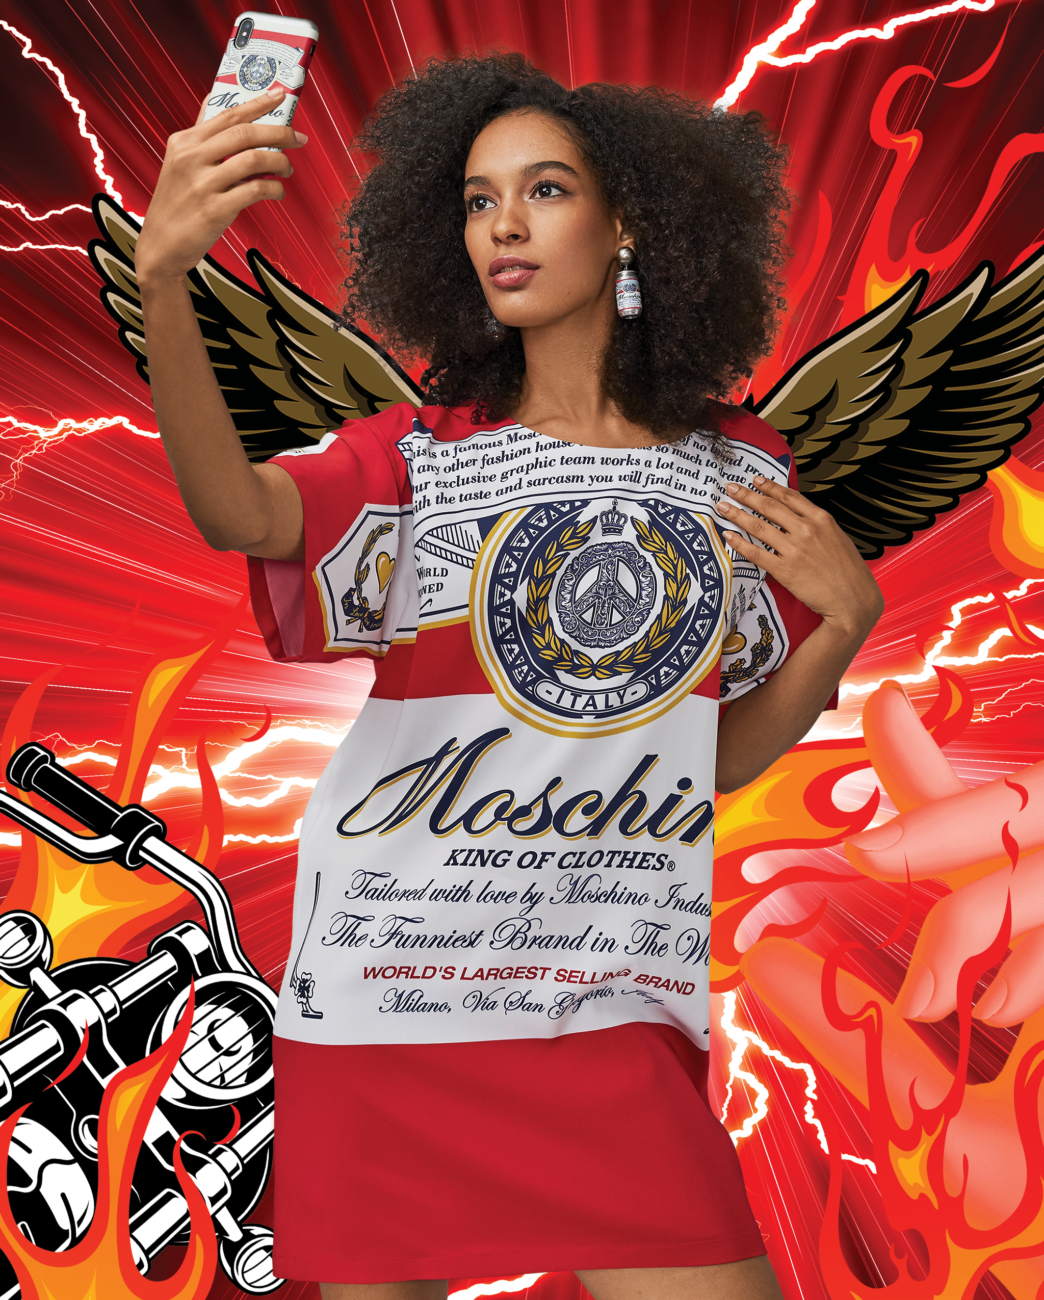 MOSCHINO X BUDWEISER Capsule Collection, Courtesy of Moschino